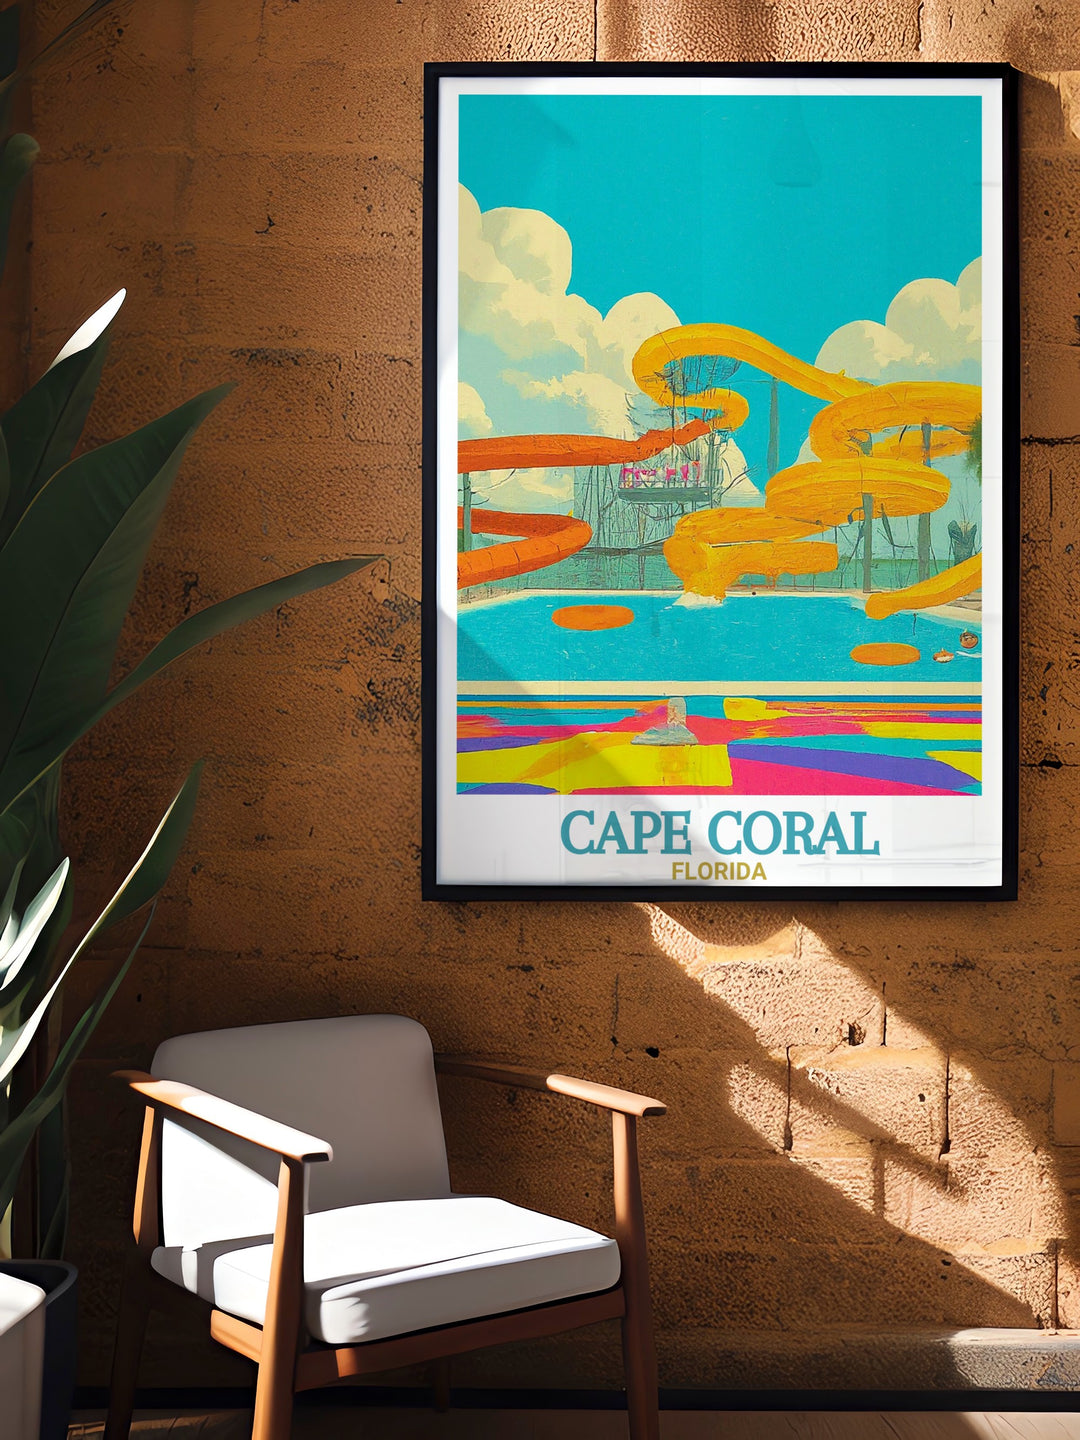 Florida Travel Print showcasing Sun Splash Family Waterpark in Cape Coral elegant wall art that captures the lively atmosphere of the waterpark making it an ideal addition to your home decor and a thoughtful gift.